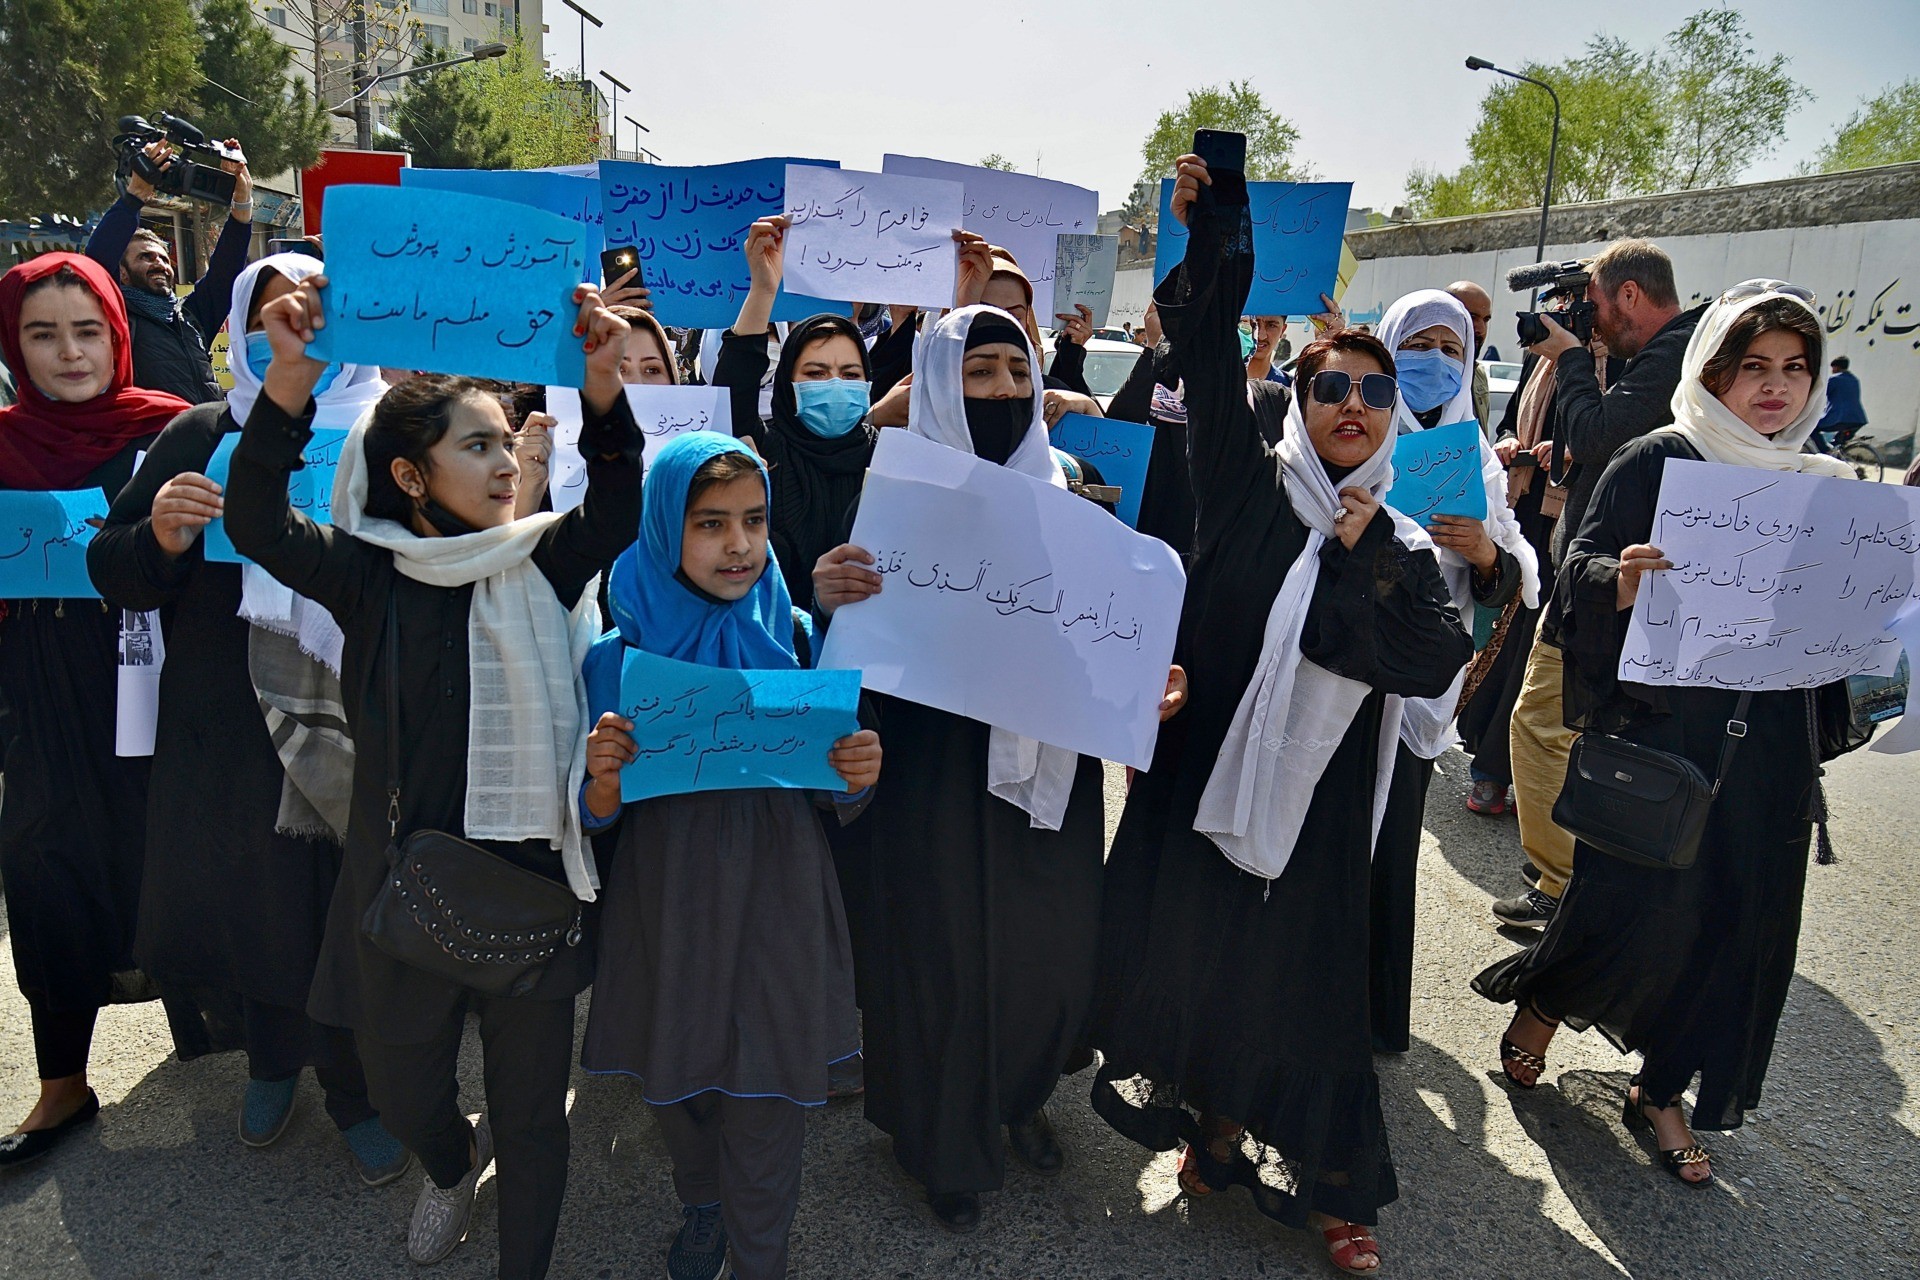 TOPSHOT - Afghan women and girls take part in a protest in front of the Ministry of Education in Kabul on March 26, 2022, demanding that high schools be reopened for girls. (Photo by Ahmad SAHEL ARMAN / AFP) (Photo by AHMAD SAHEL ARMAN/AFP via Getty Images)